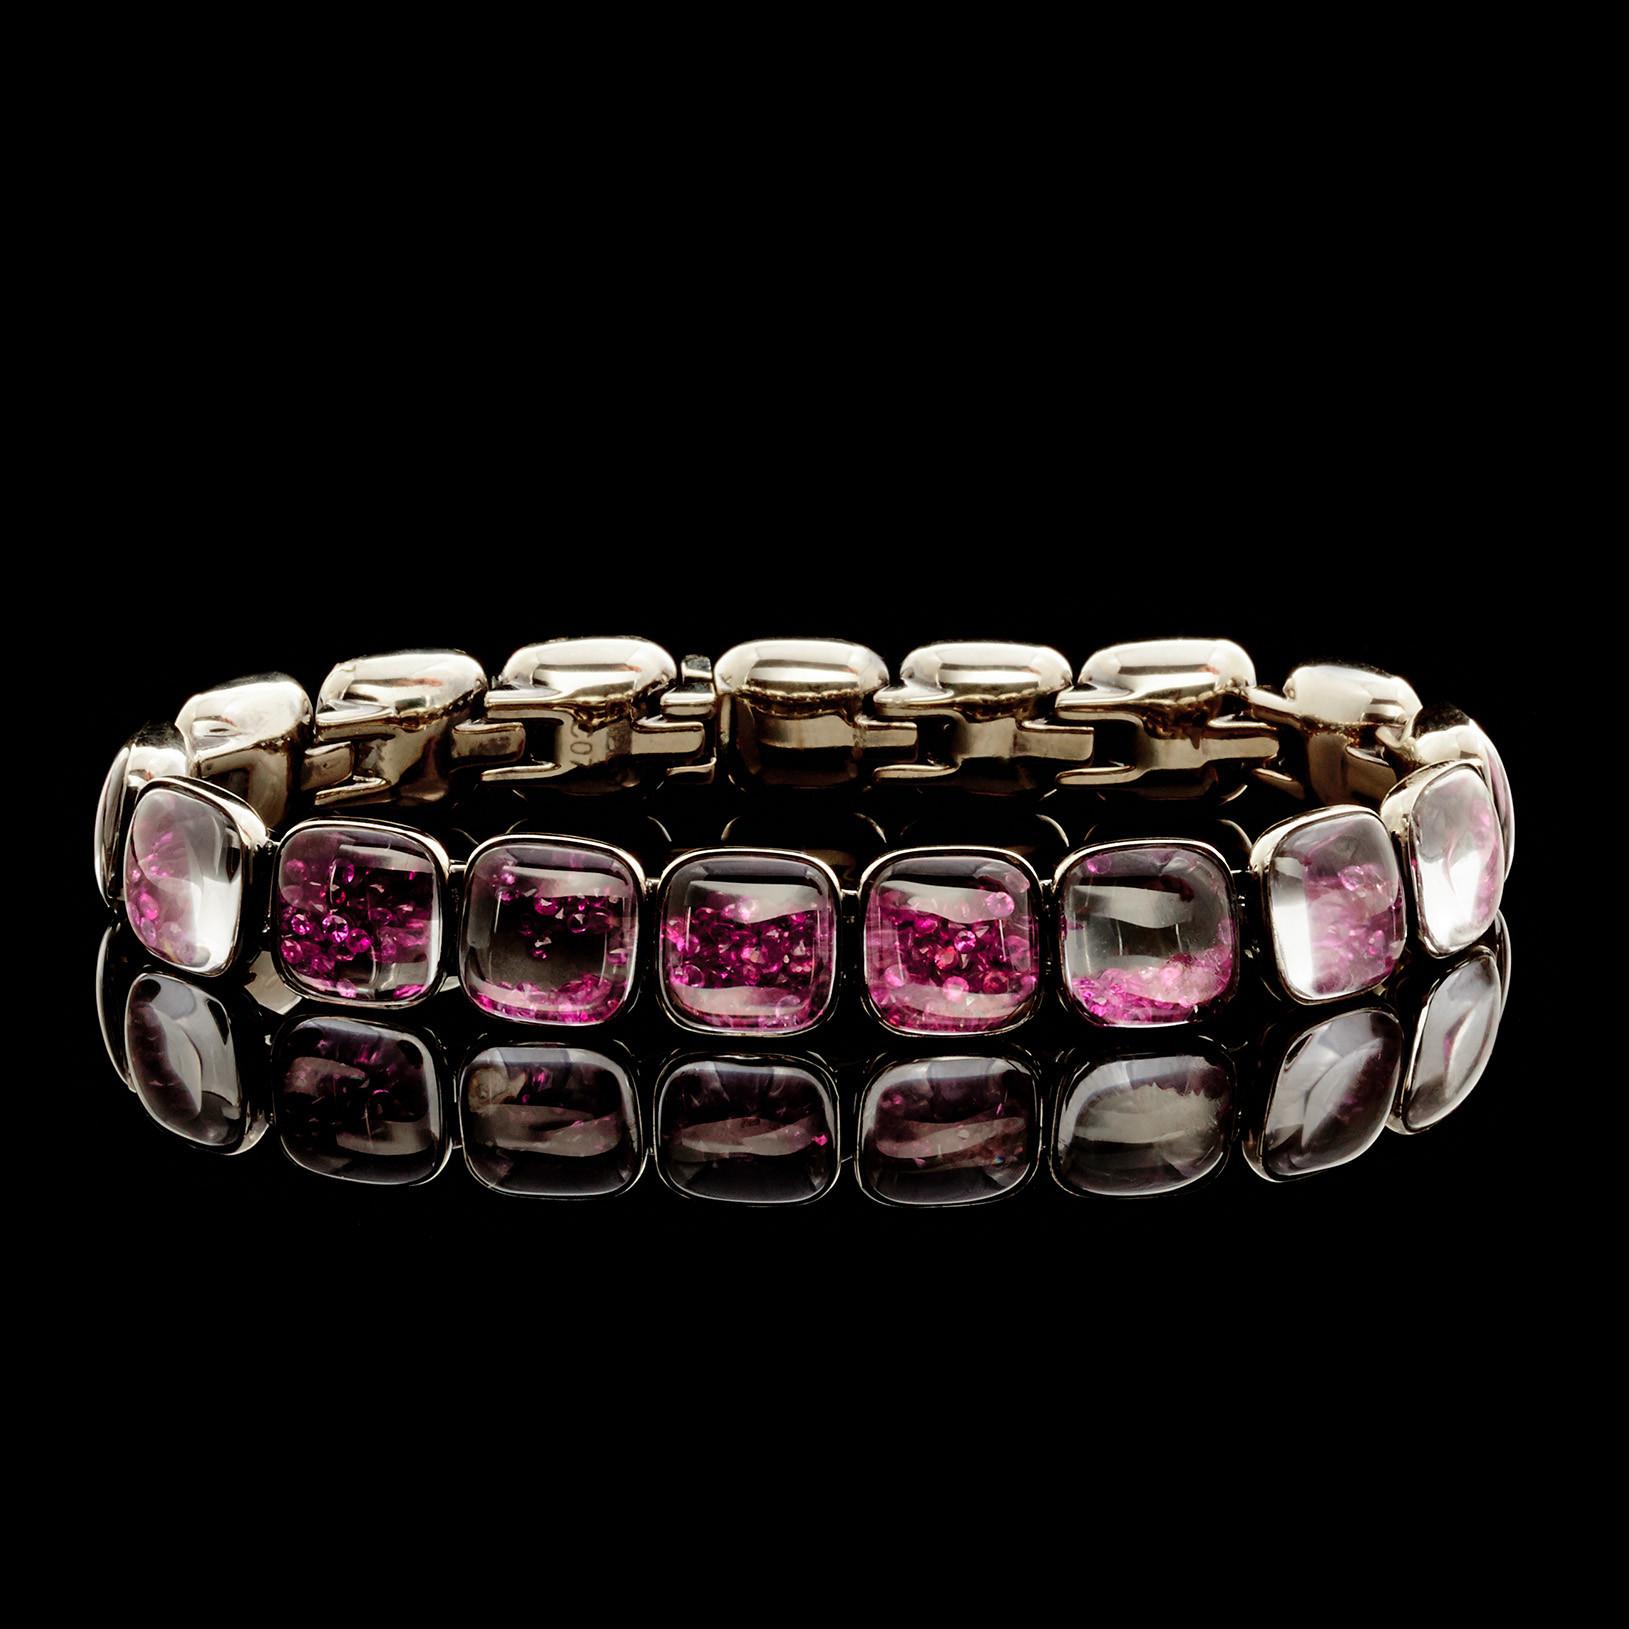 This Modern Design 18Kt White Gold Mattia Cielo Bracelet features 11x11mm square links filled with loose Melee size Rubies totaling 7.35 carats and one link with Black Diamonds totaling 0.70 carats. The length of the bracelet is 7.25 inches and